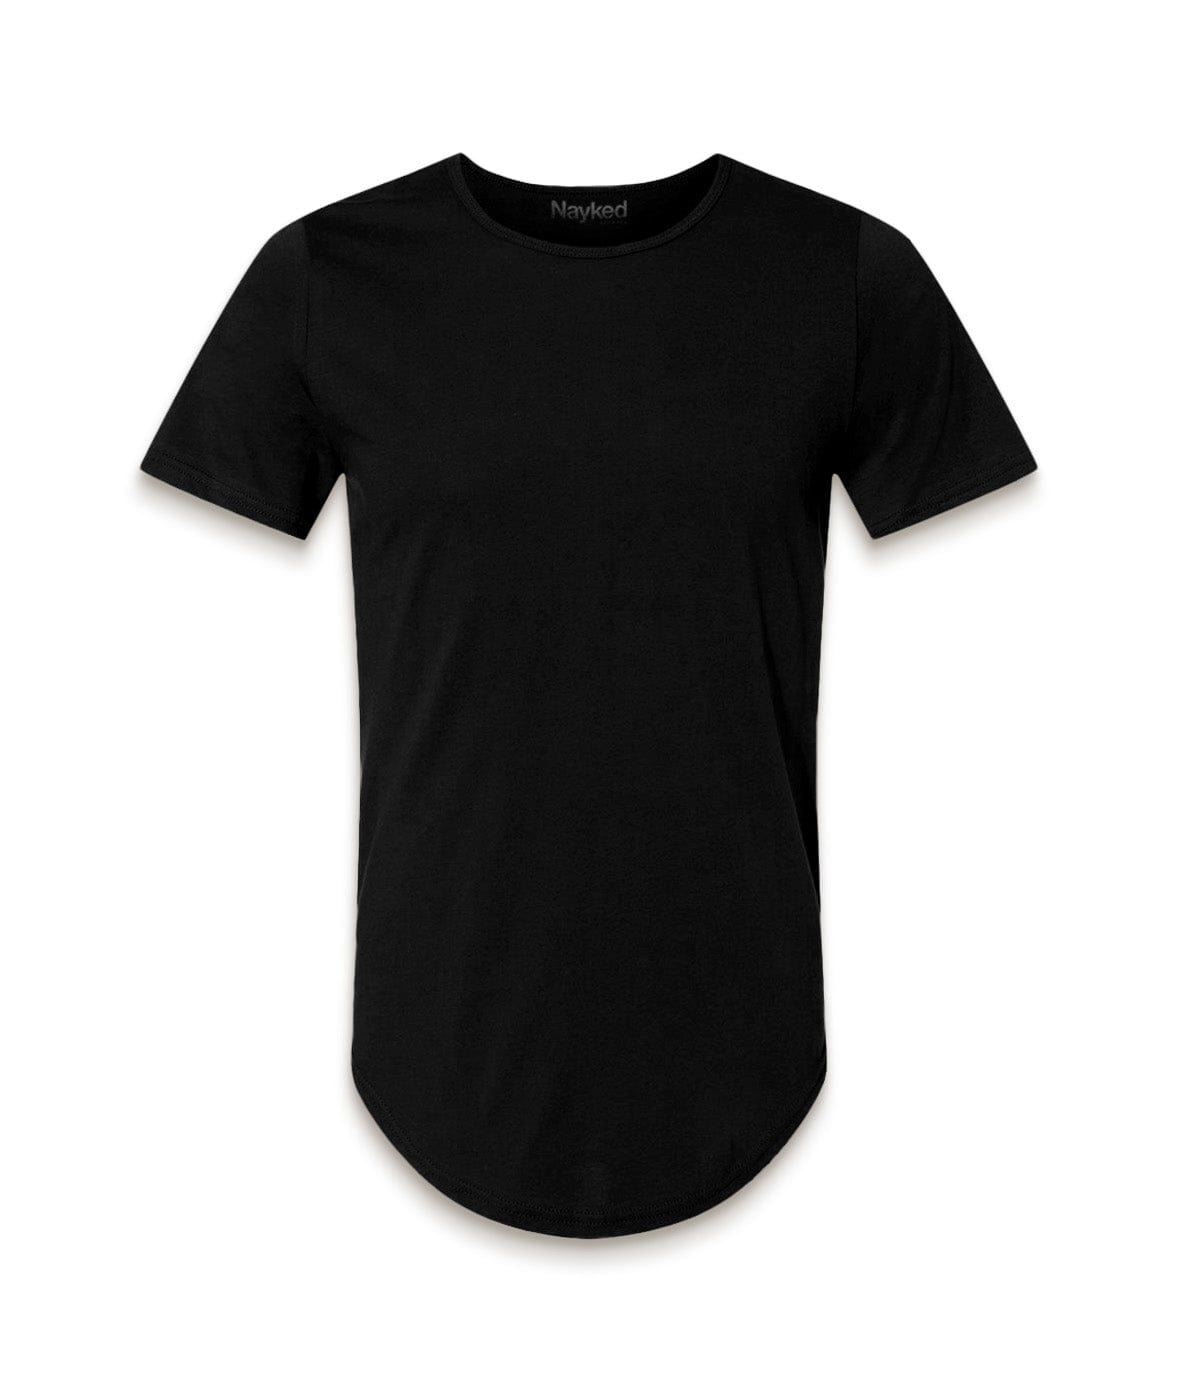 Men's Ridiculously Soft Curved Hem Urban T-Shirt Worn by Model